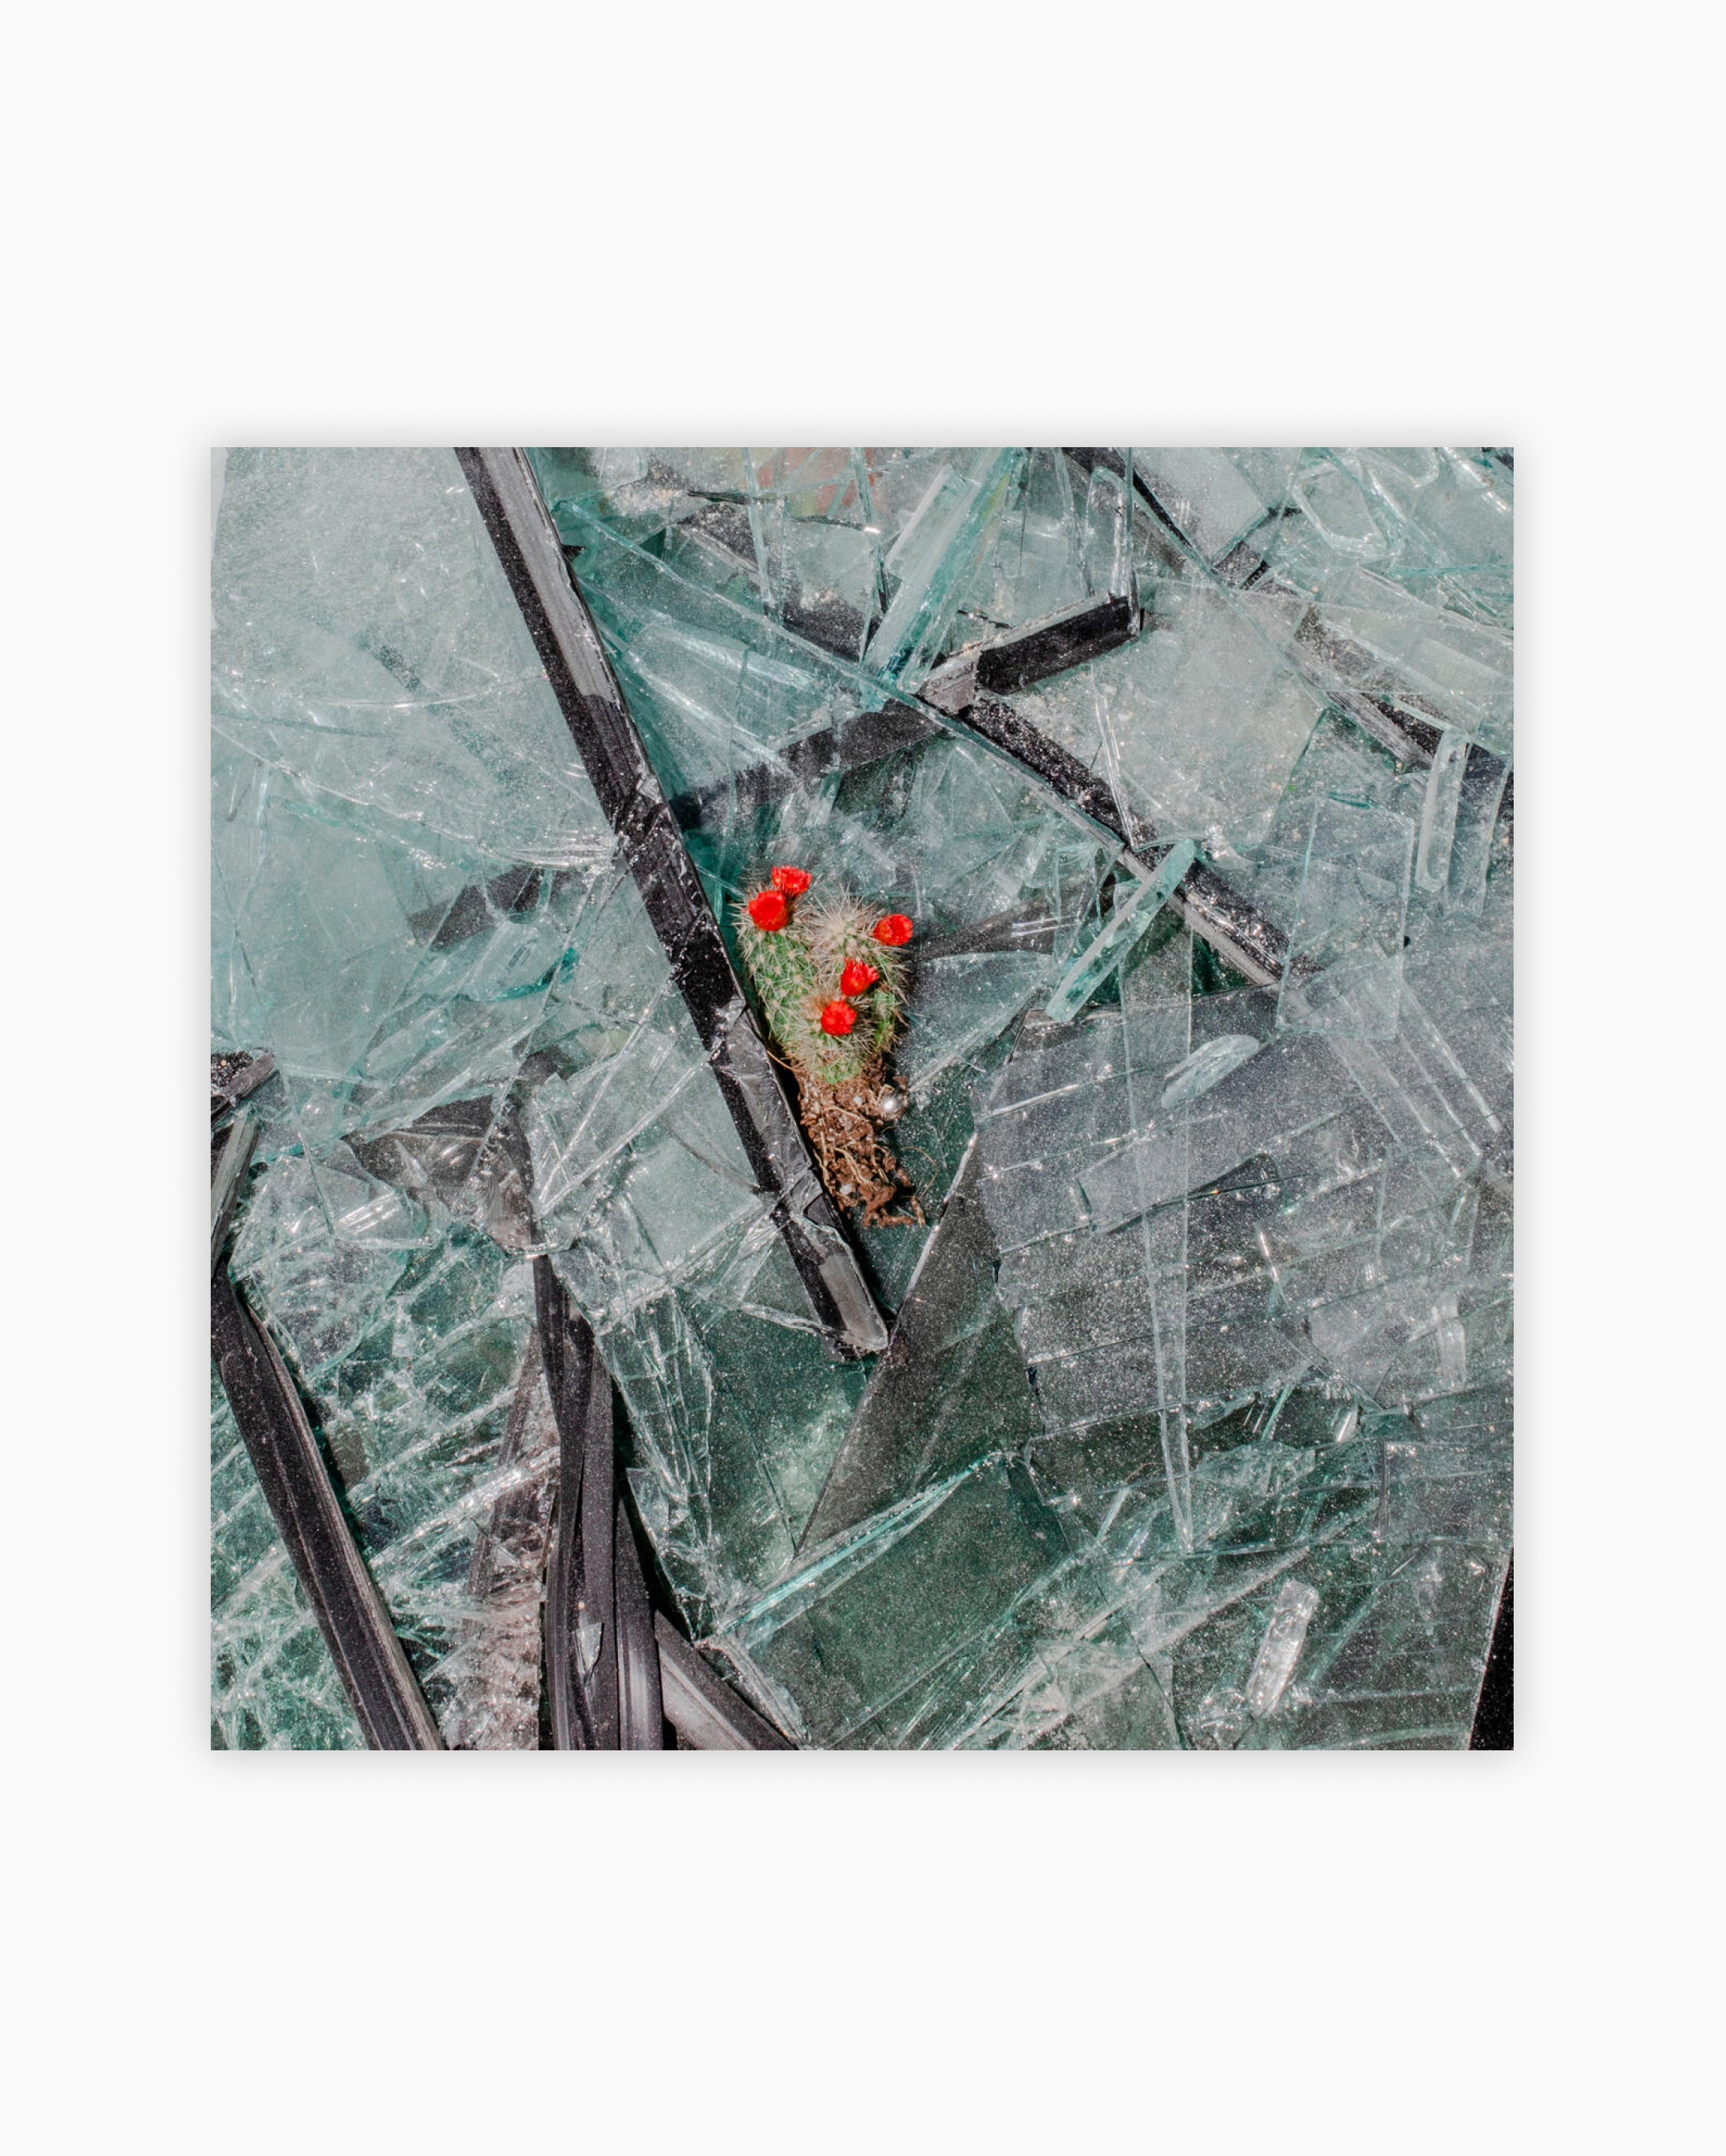 A cactus in broken glass after the explosion. Beirut, Lebanon, 2020